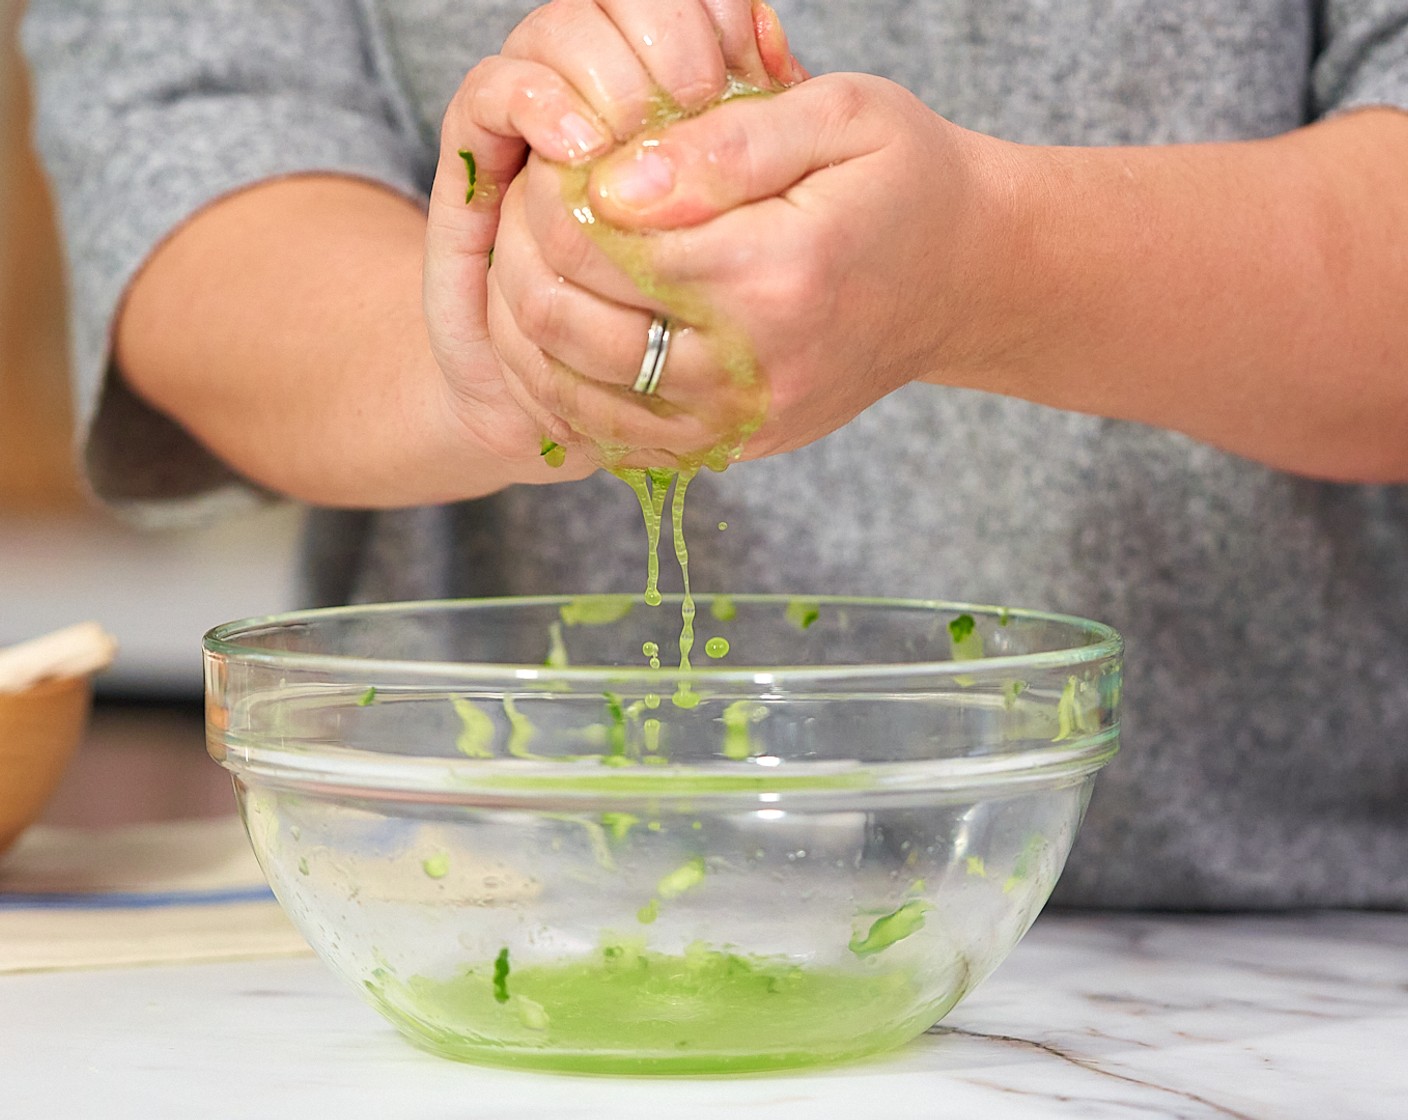 step 5 Use clean hands to squeeze out the extra liquid, then drain the liquid and return the cucumber to the bowl.